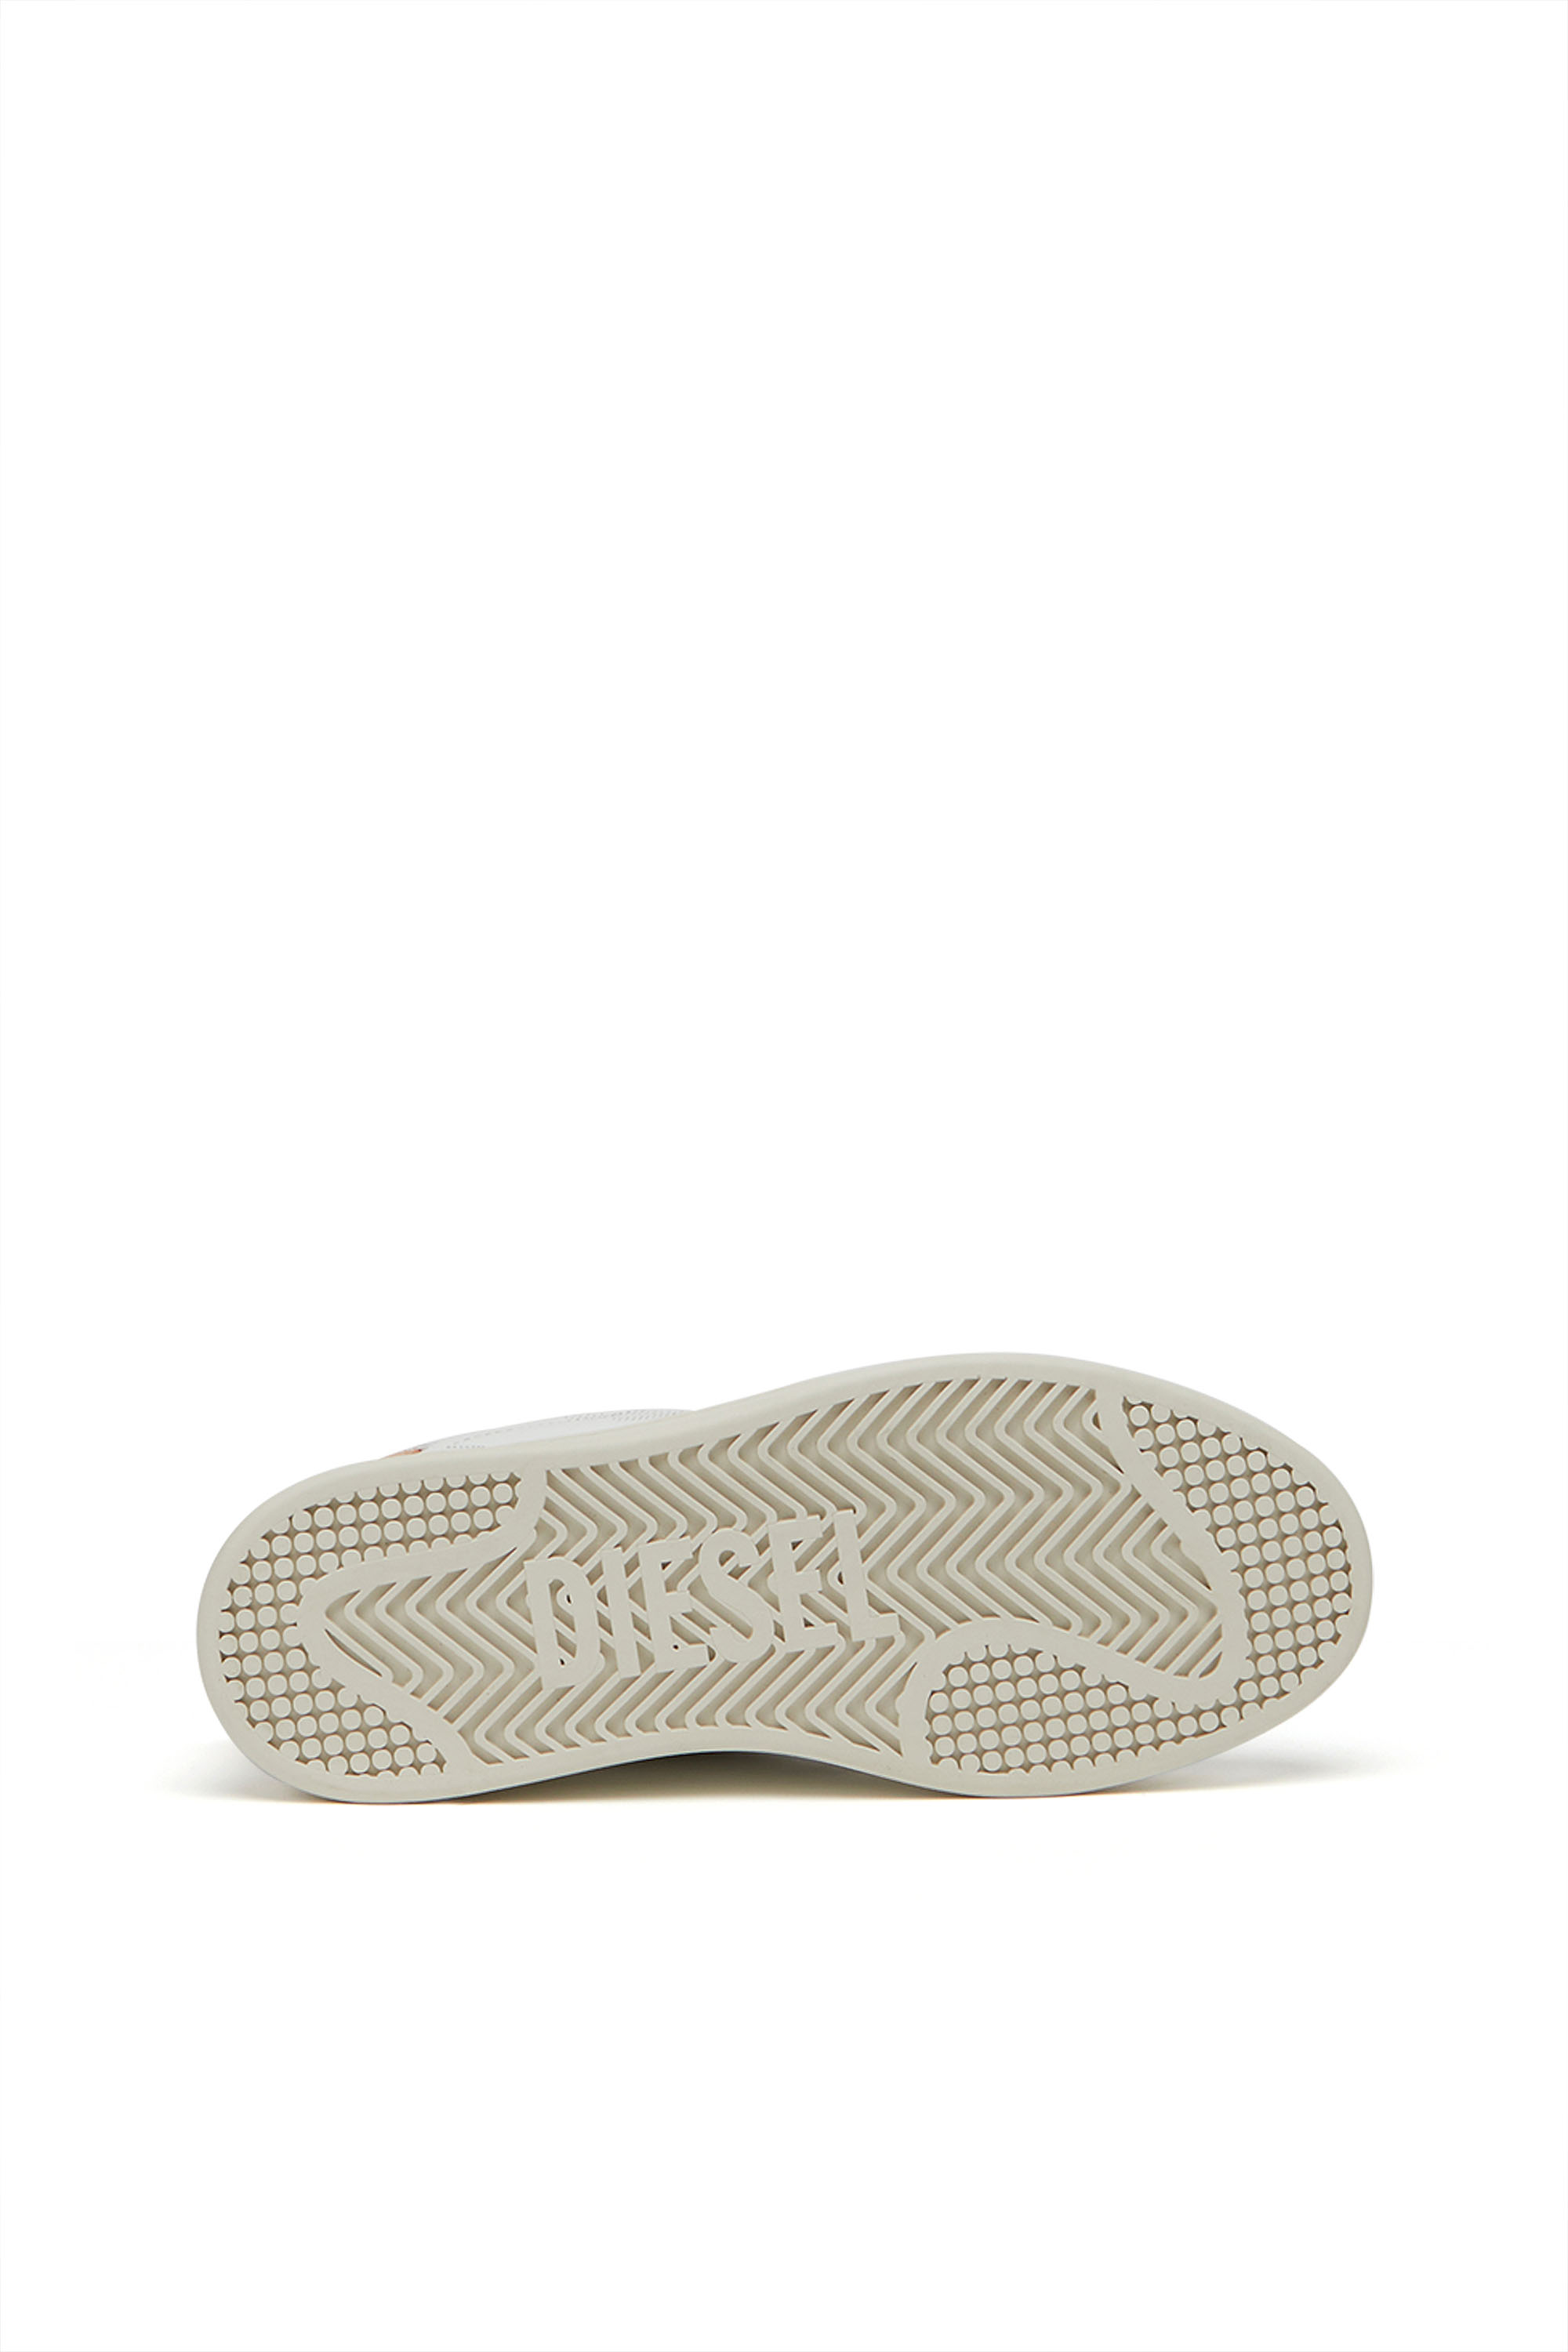 Diesel - S-ATHENE LOW W, Weiss/Rosa - Image 4